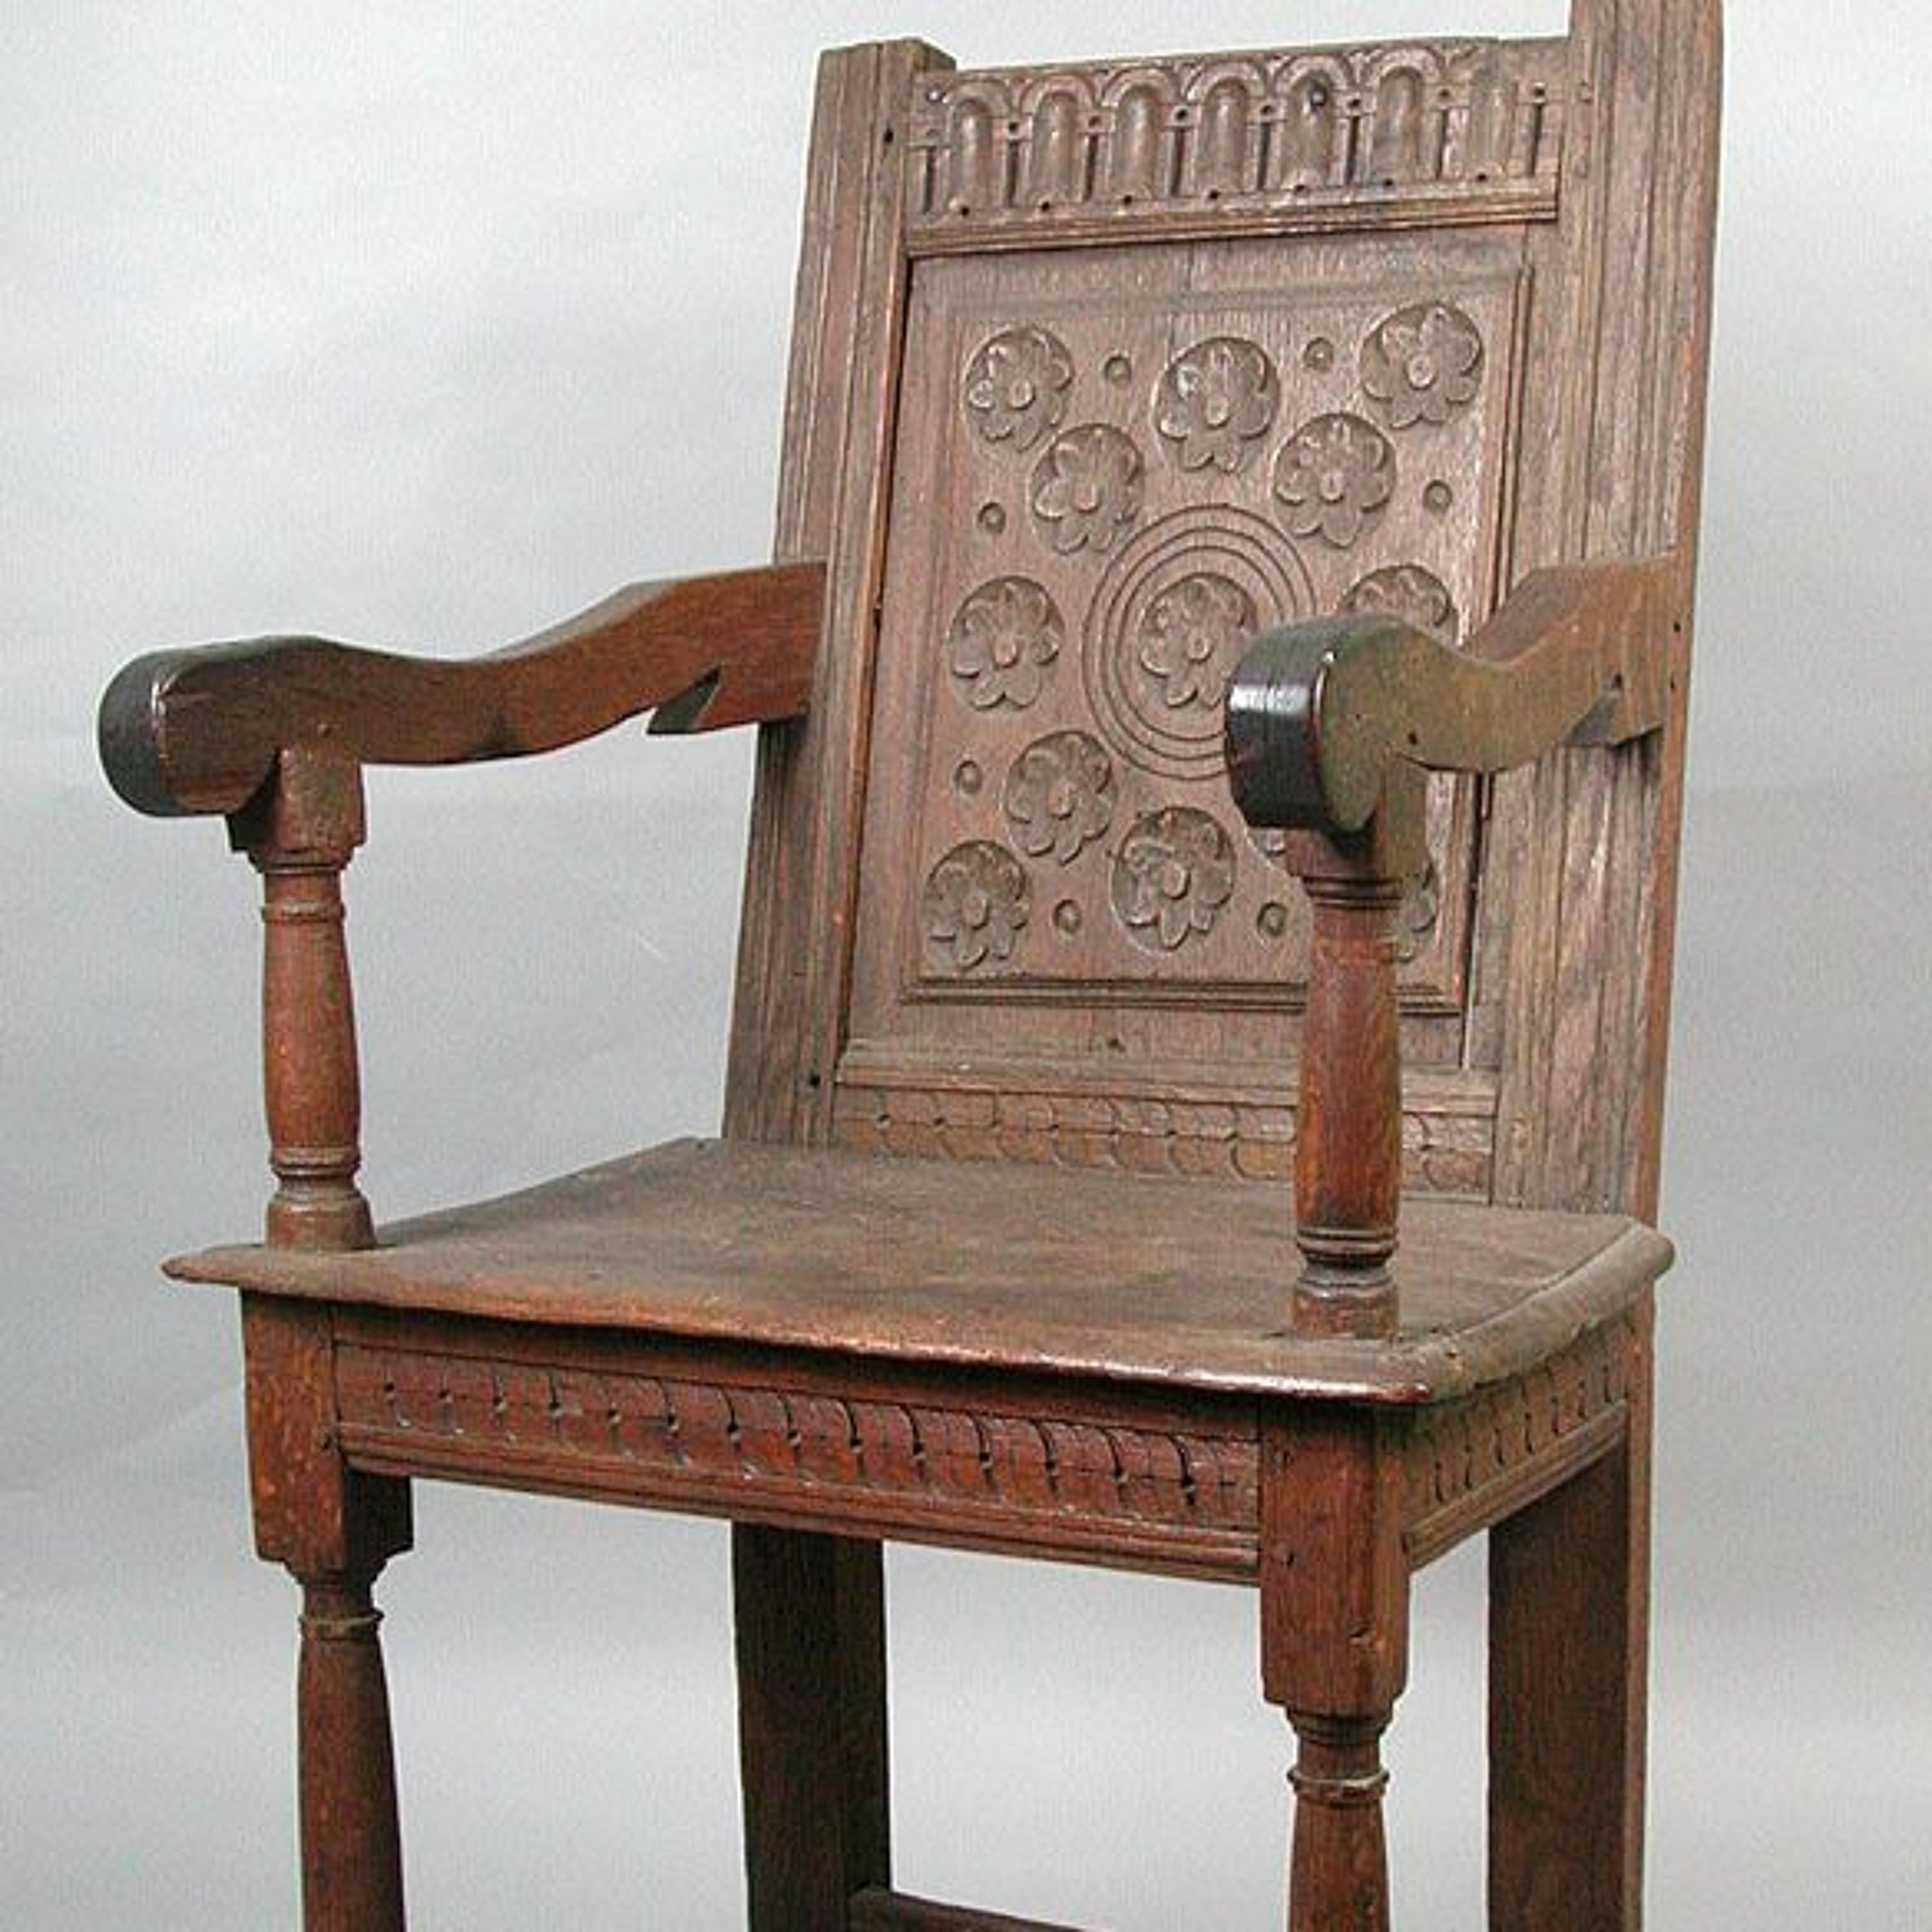 History of the United States in 100 Objects -- 14: The Winthrop Alchemical Physician’s Chair